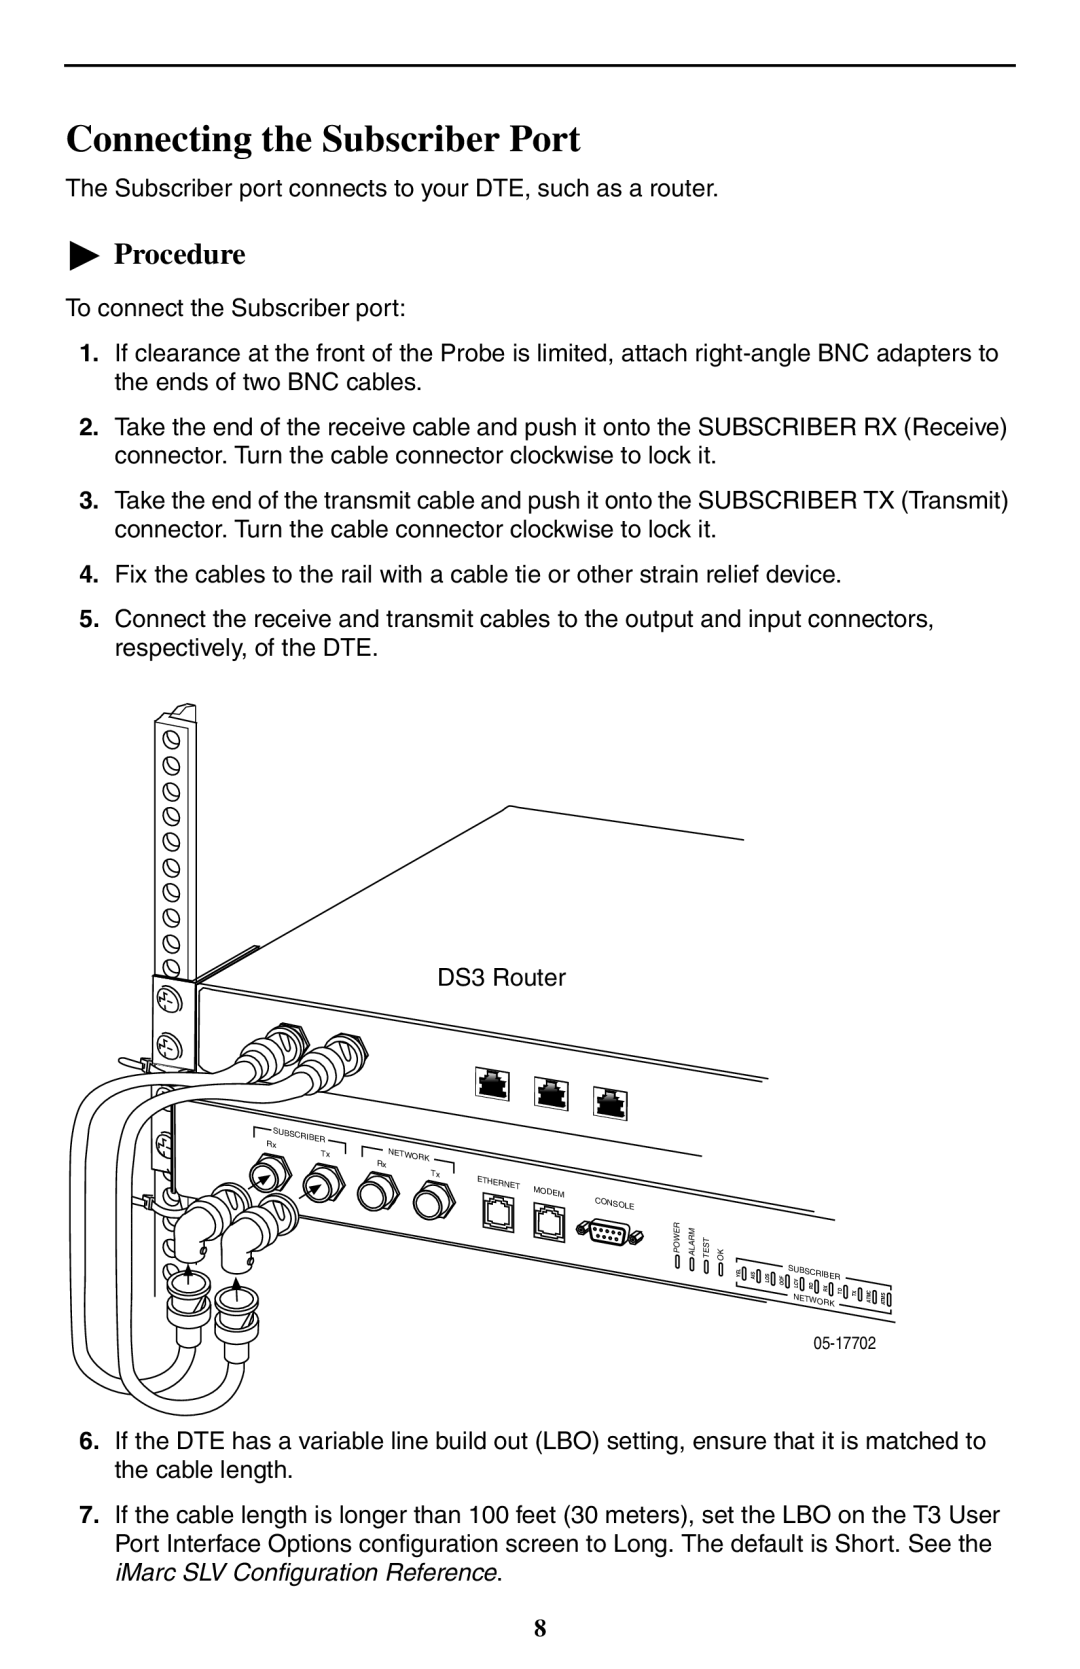 Paradyne 9550 DS3 installation instructions Connecting the Subscriber Port, Procedure 